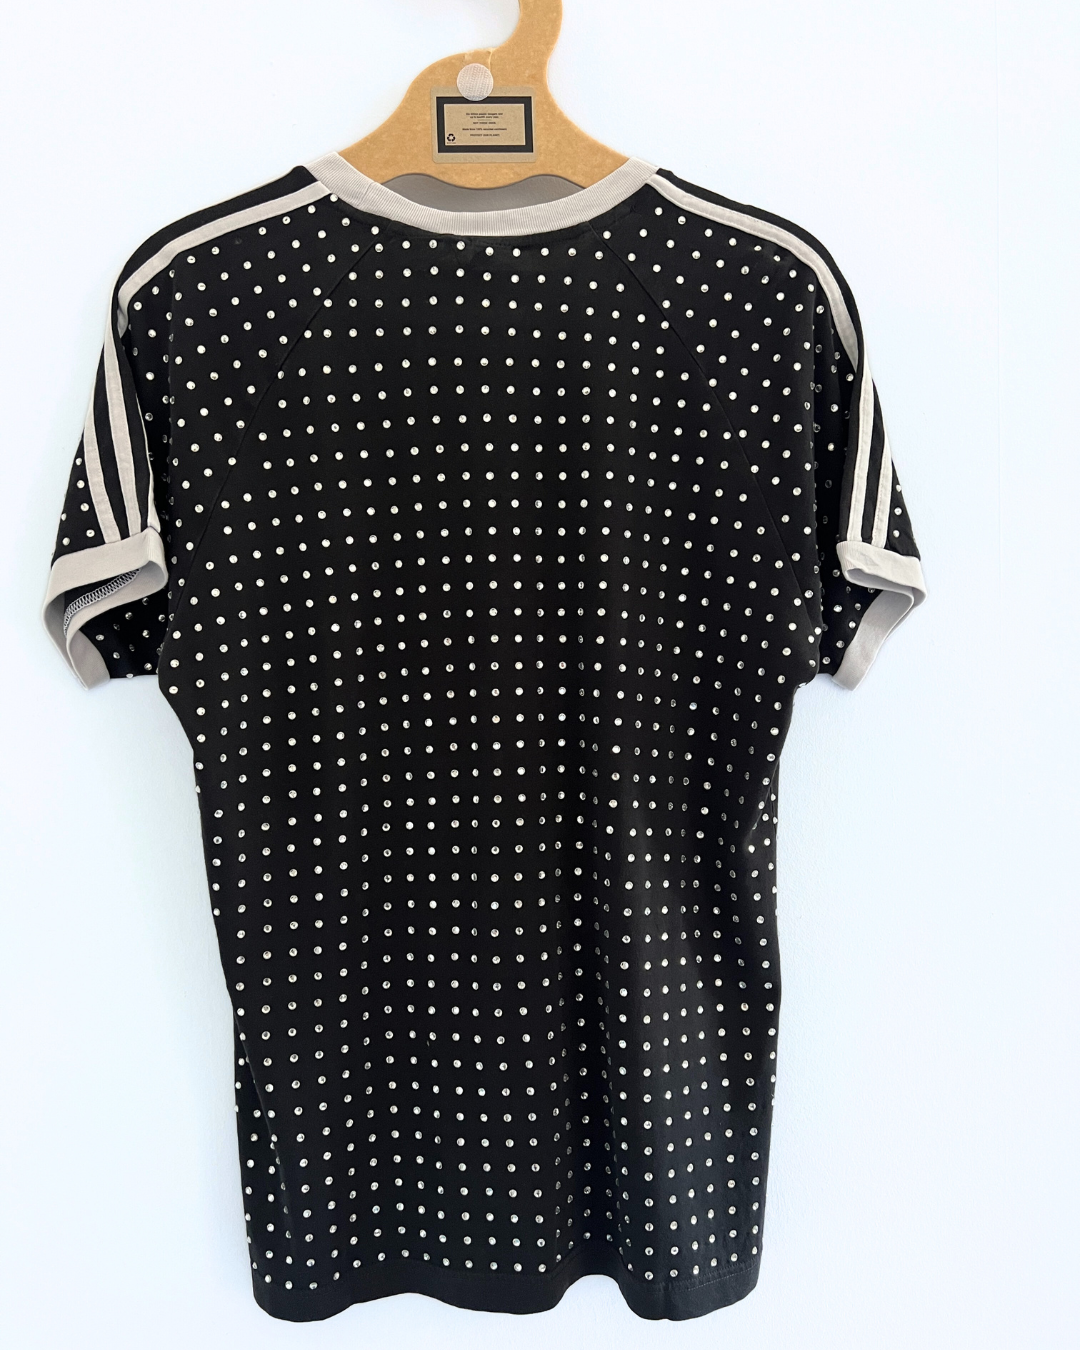 Vintage Black ADIDAS T-shirt with all over diamante studs